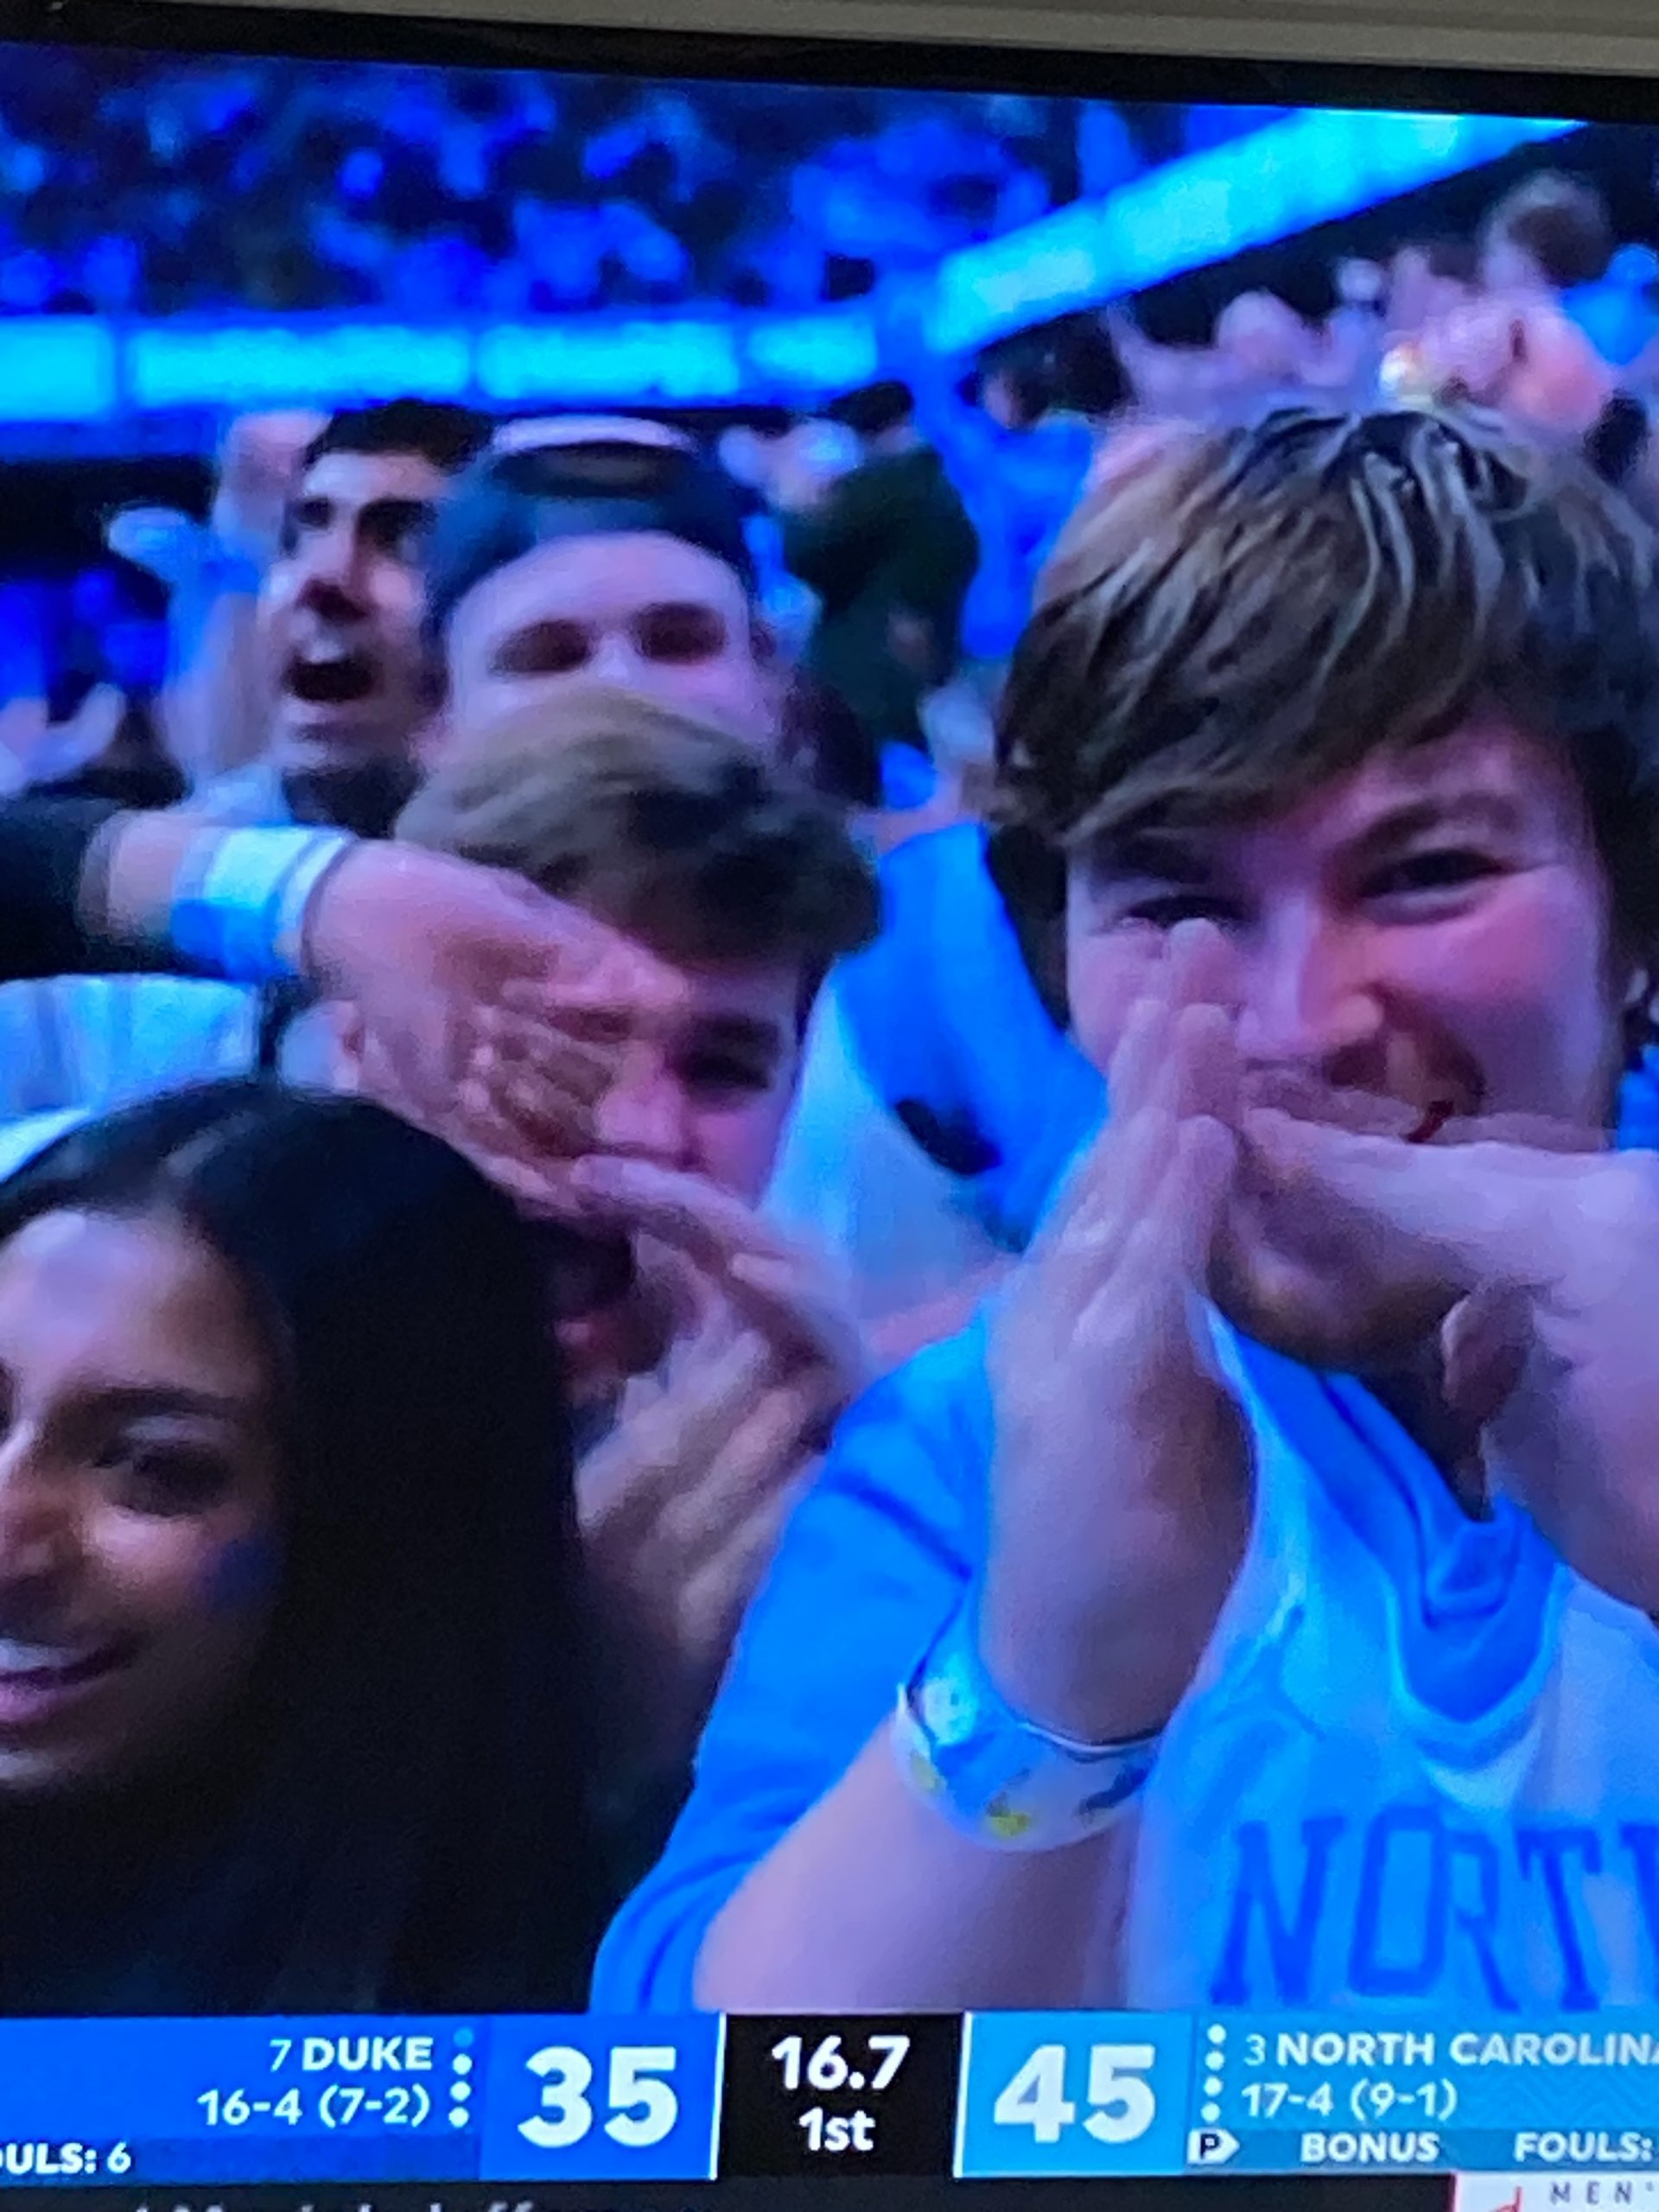 Jubilant UNC fans form the timeout symbol as Duke falls behind double digits late in the first half against UNC.